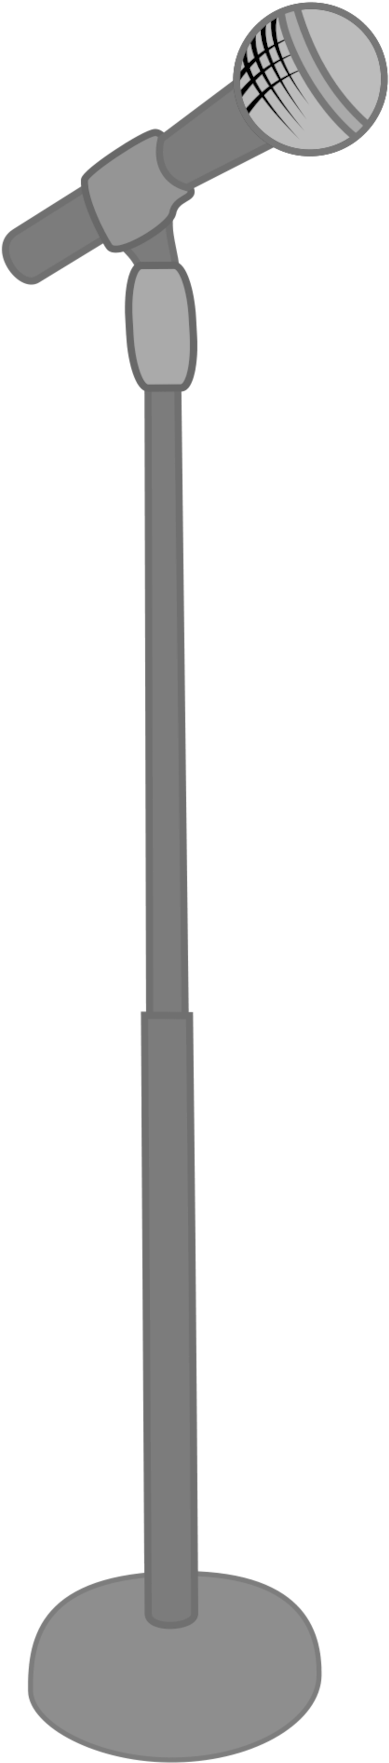 Mic Stand Vector By Meteor-venture - Microphone Stand Clipart (447x1786)